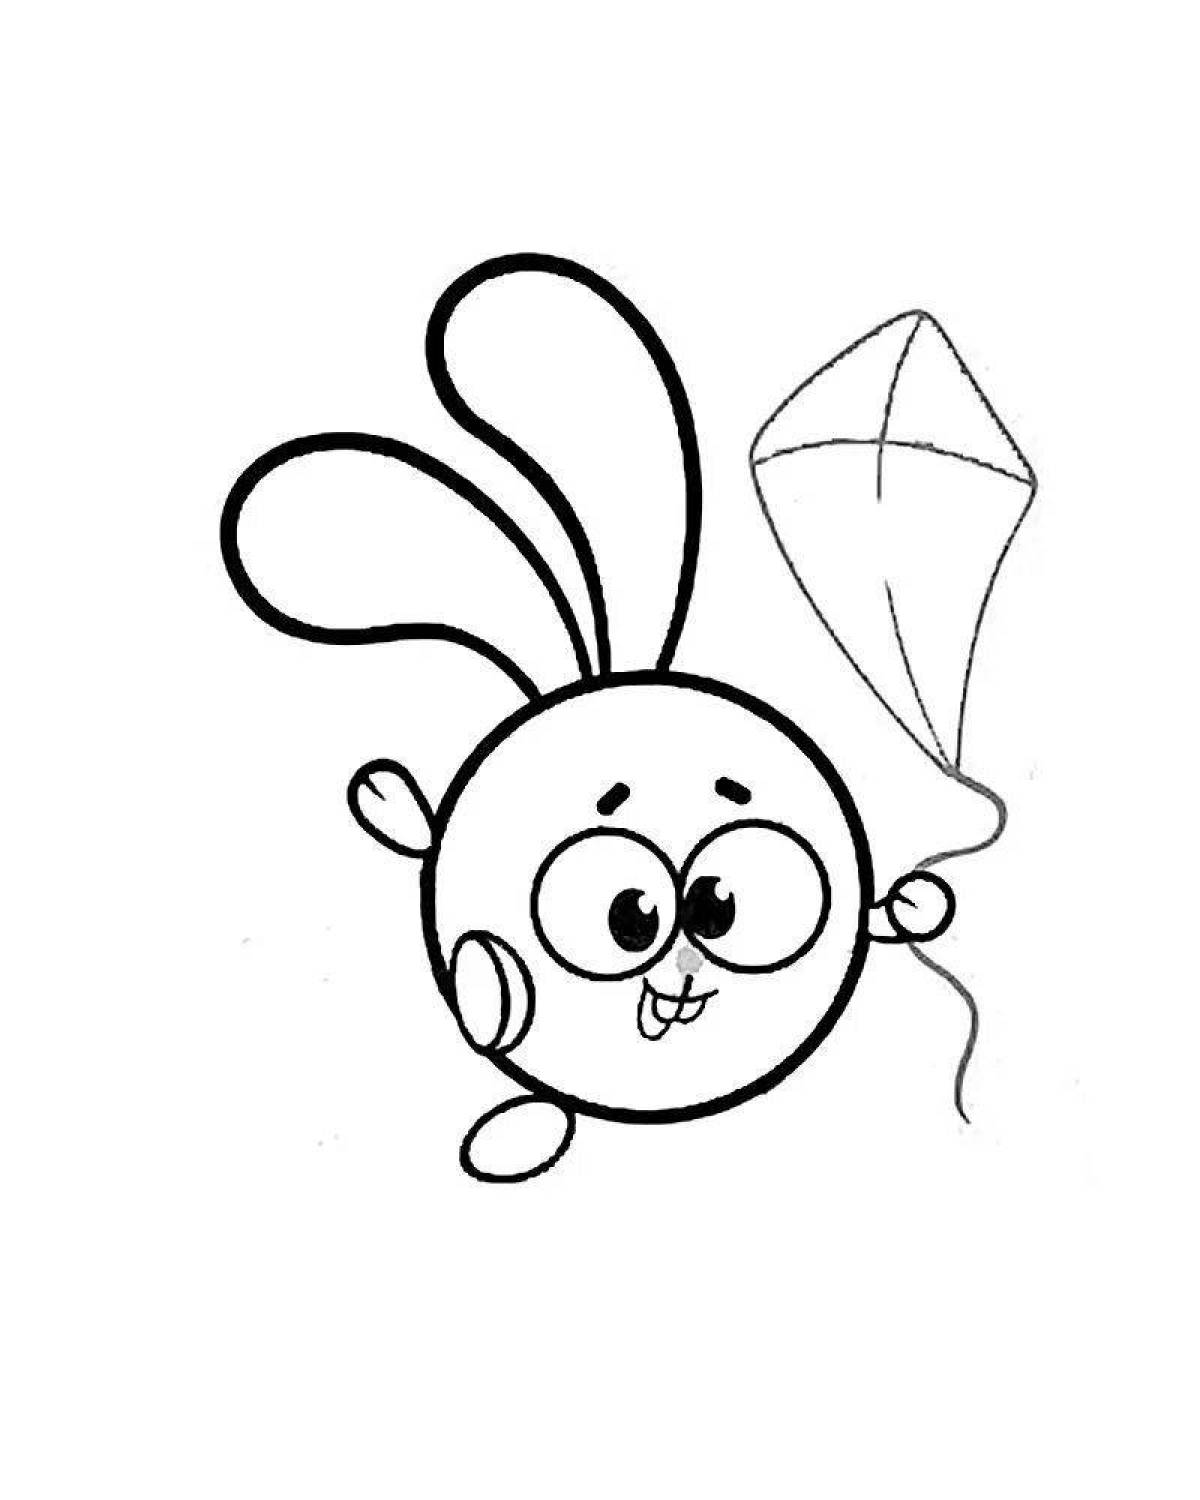 Snuggly coloring page baby crumb